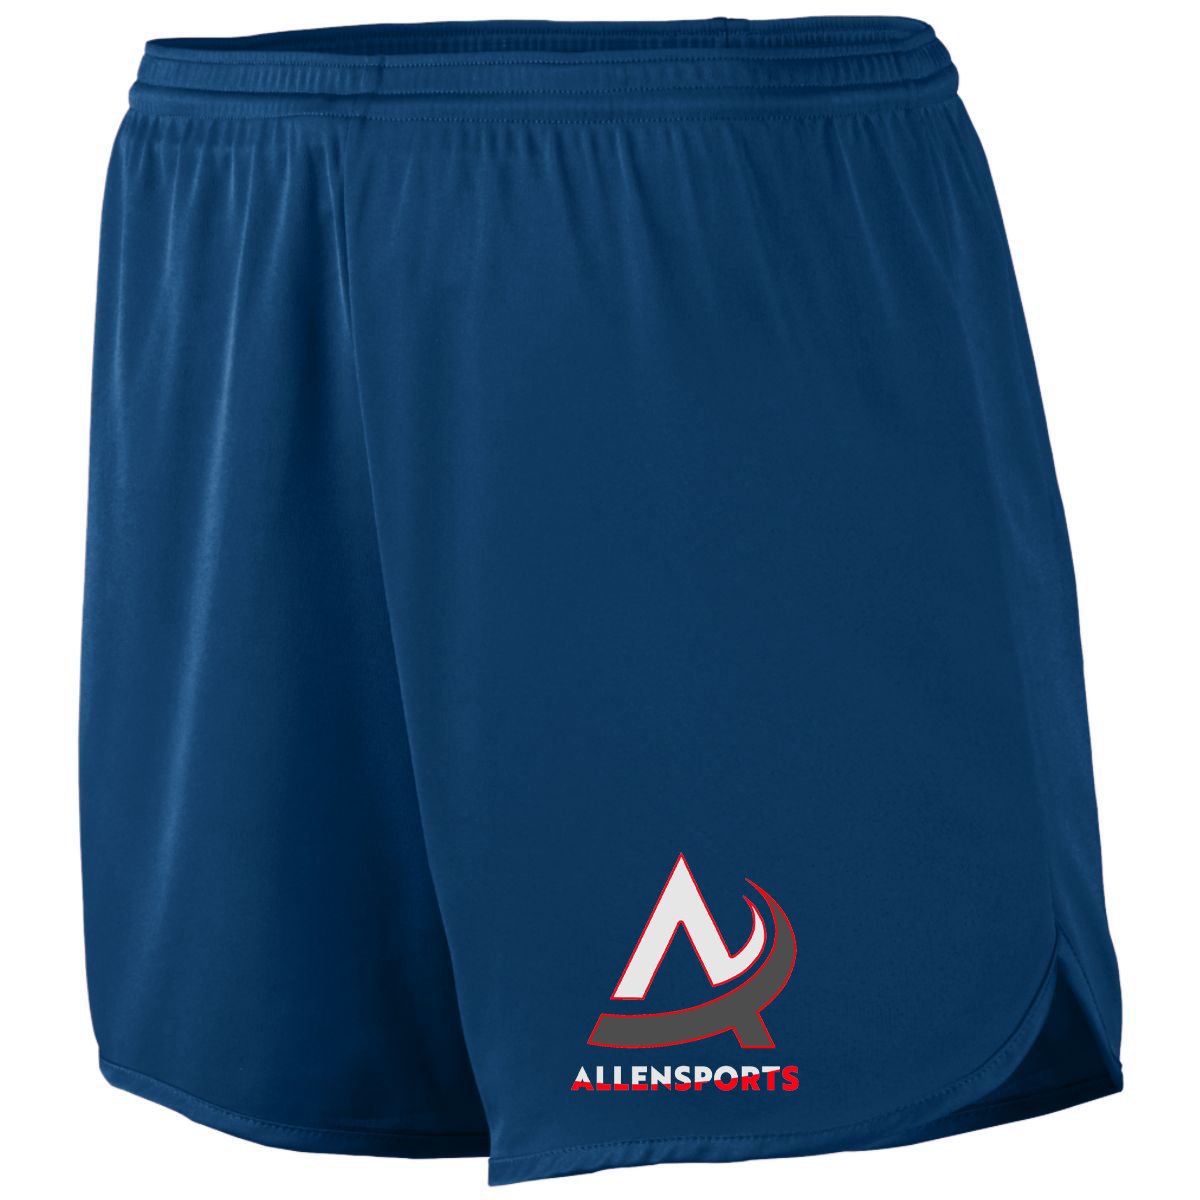 AllenSports Accelerate Shorts